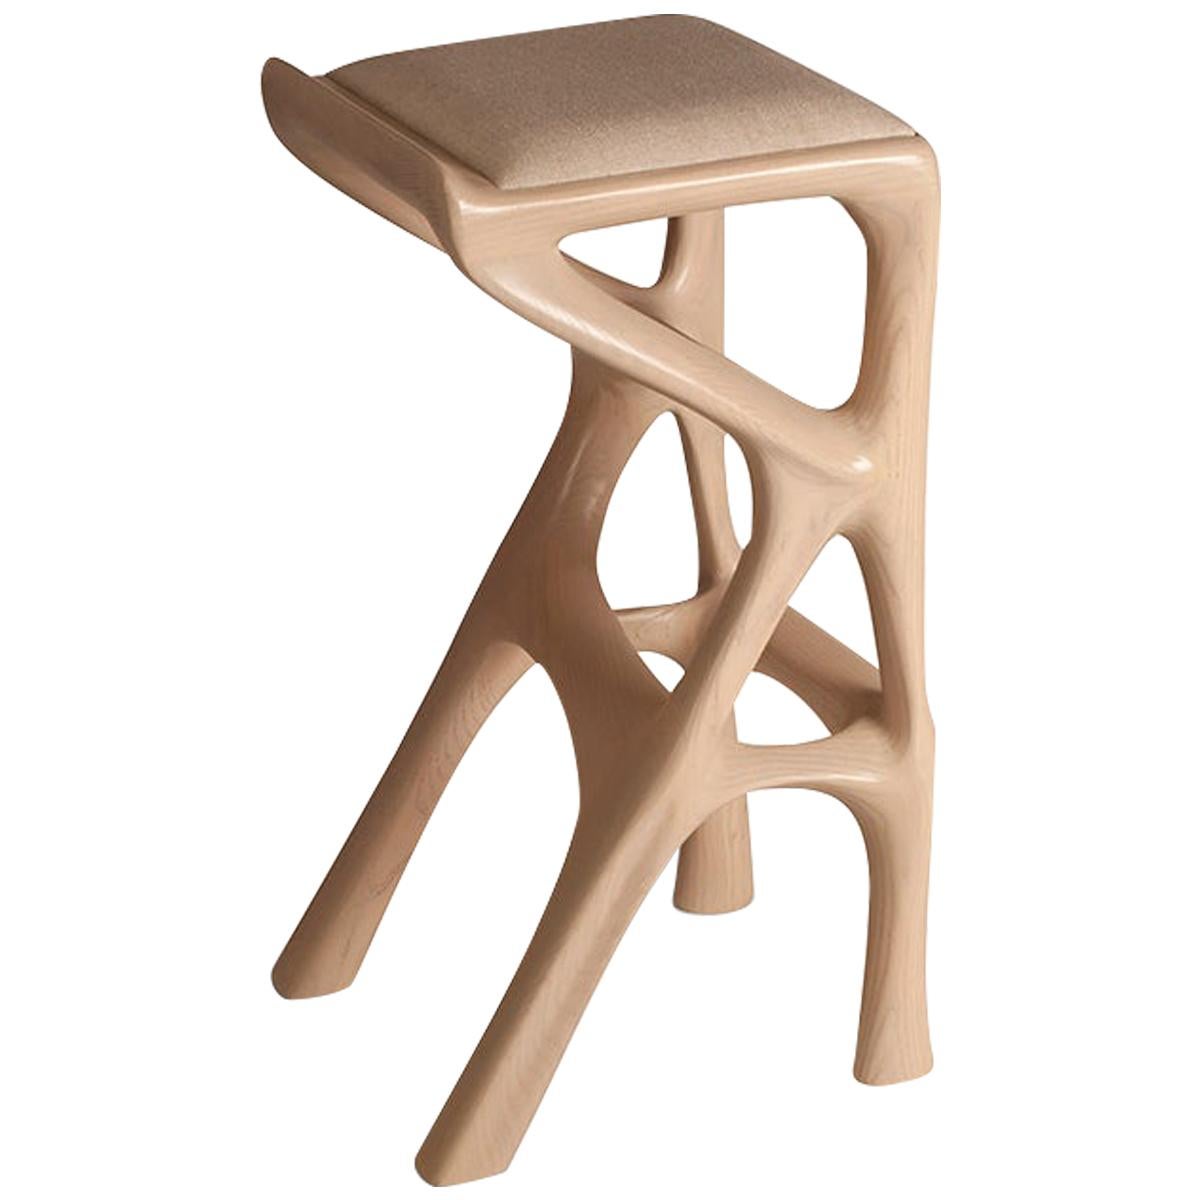 Amorph Chimera Bar Stool Asian Sand stain on Ash wood with Upholstery